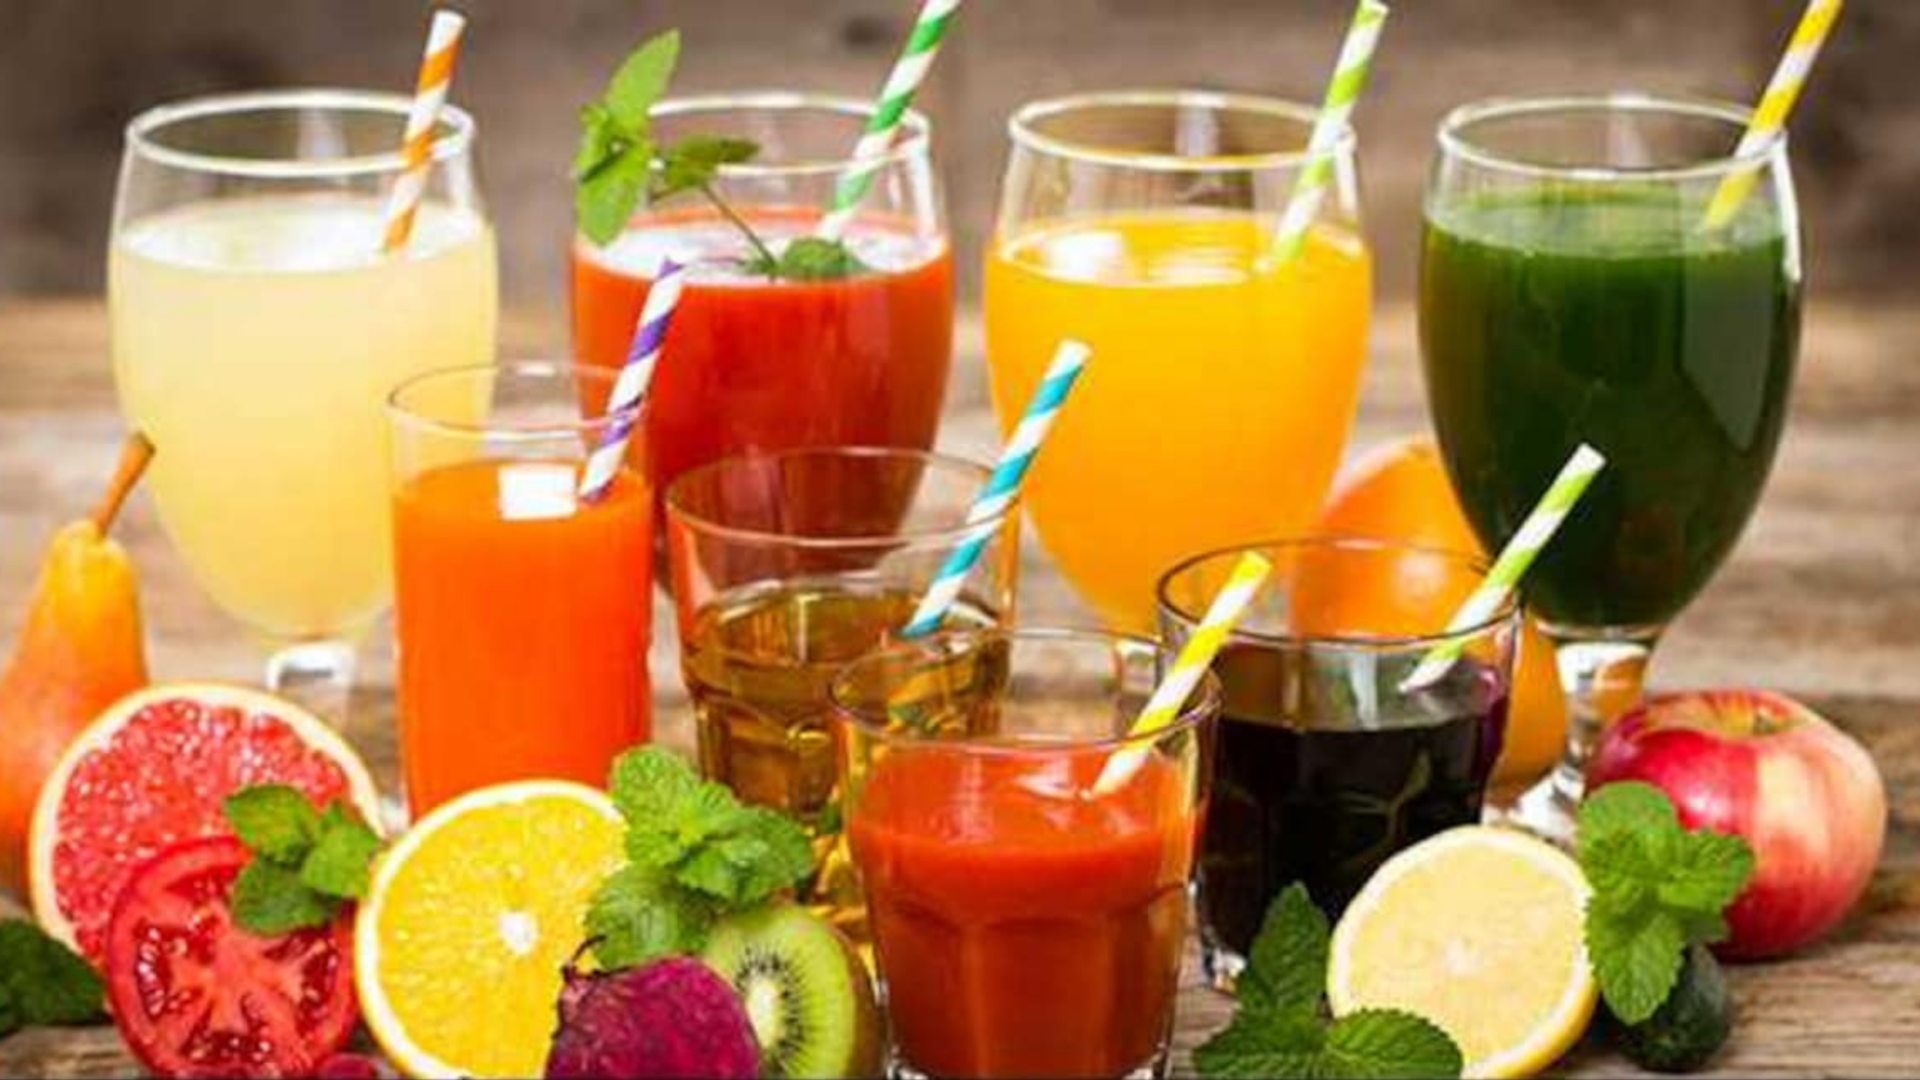 top 11 popular drinks and beverages in odisha that will refresh your mind | ebhubaneswar